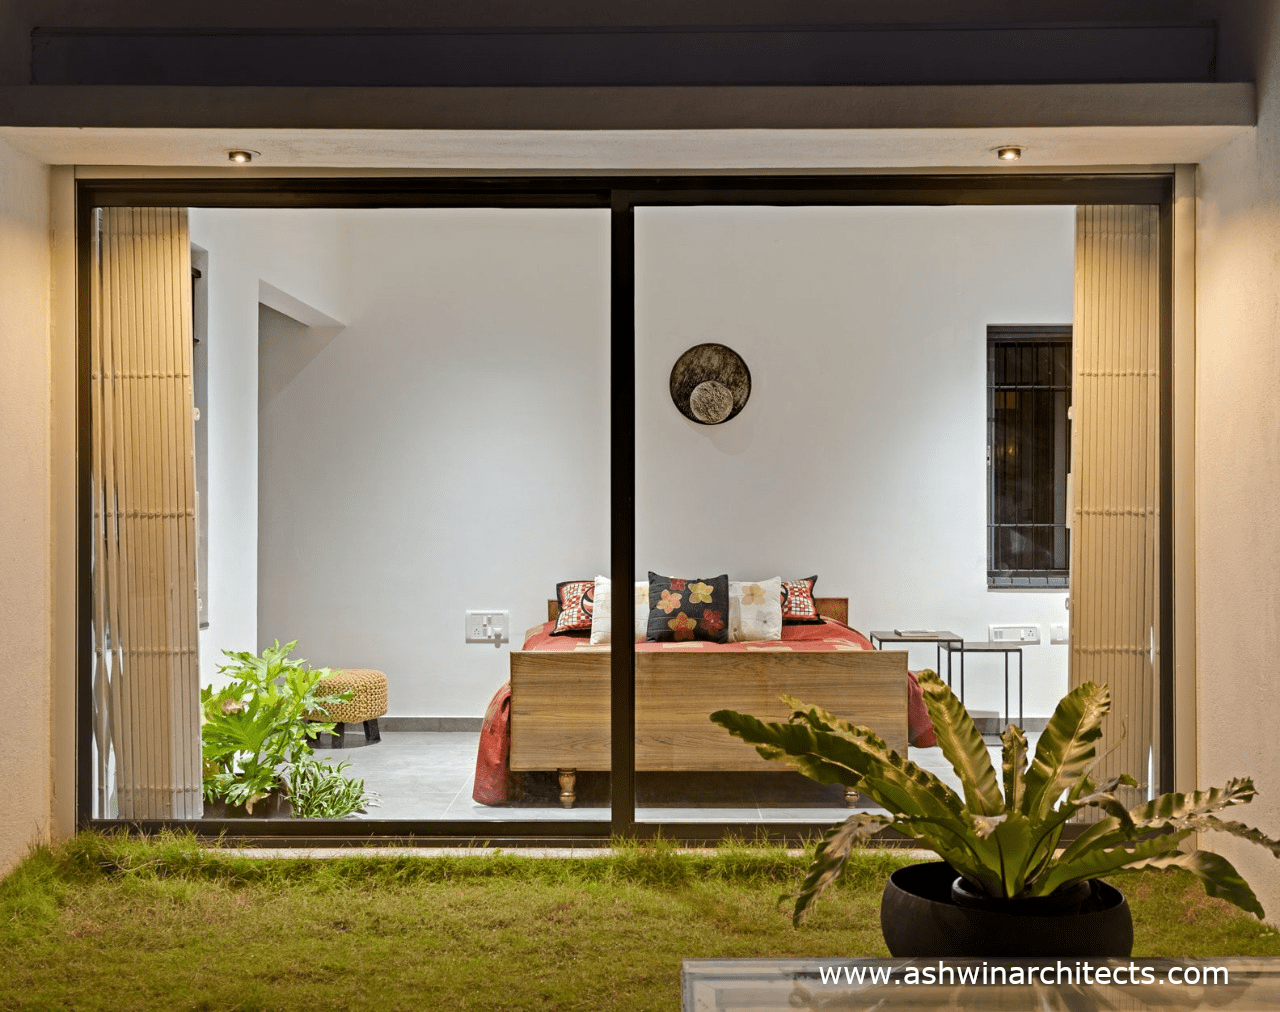 pawans-30-50-house-design-residential-architects-in-bangalore-evening-terrace-bedroom